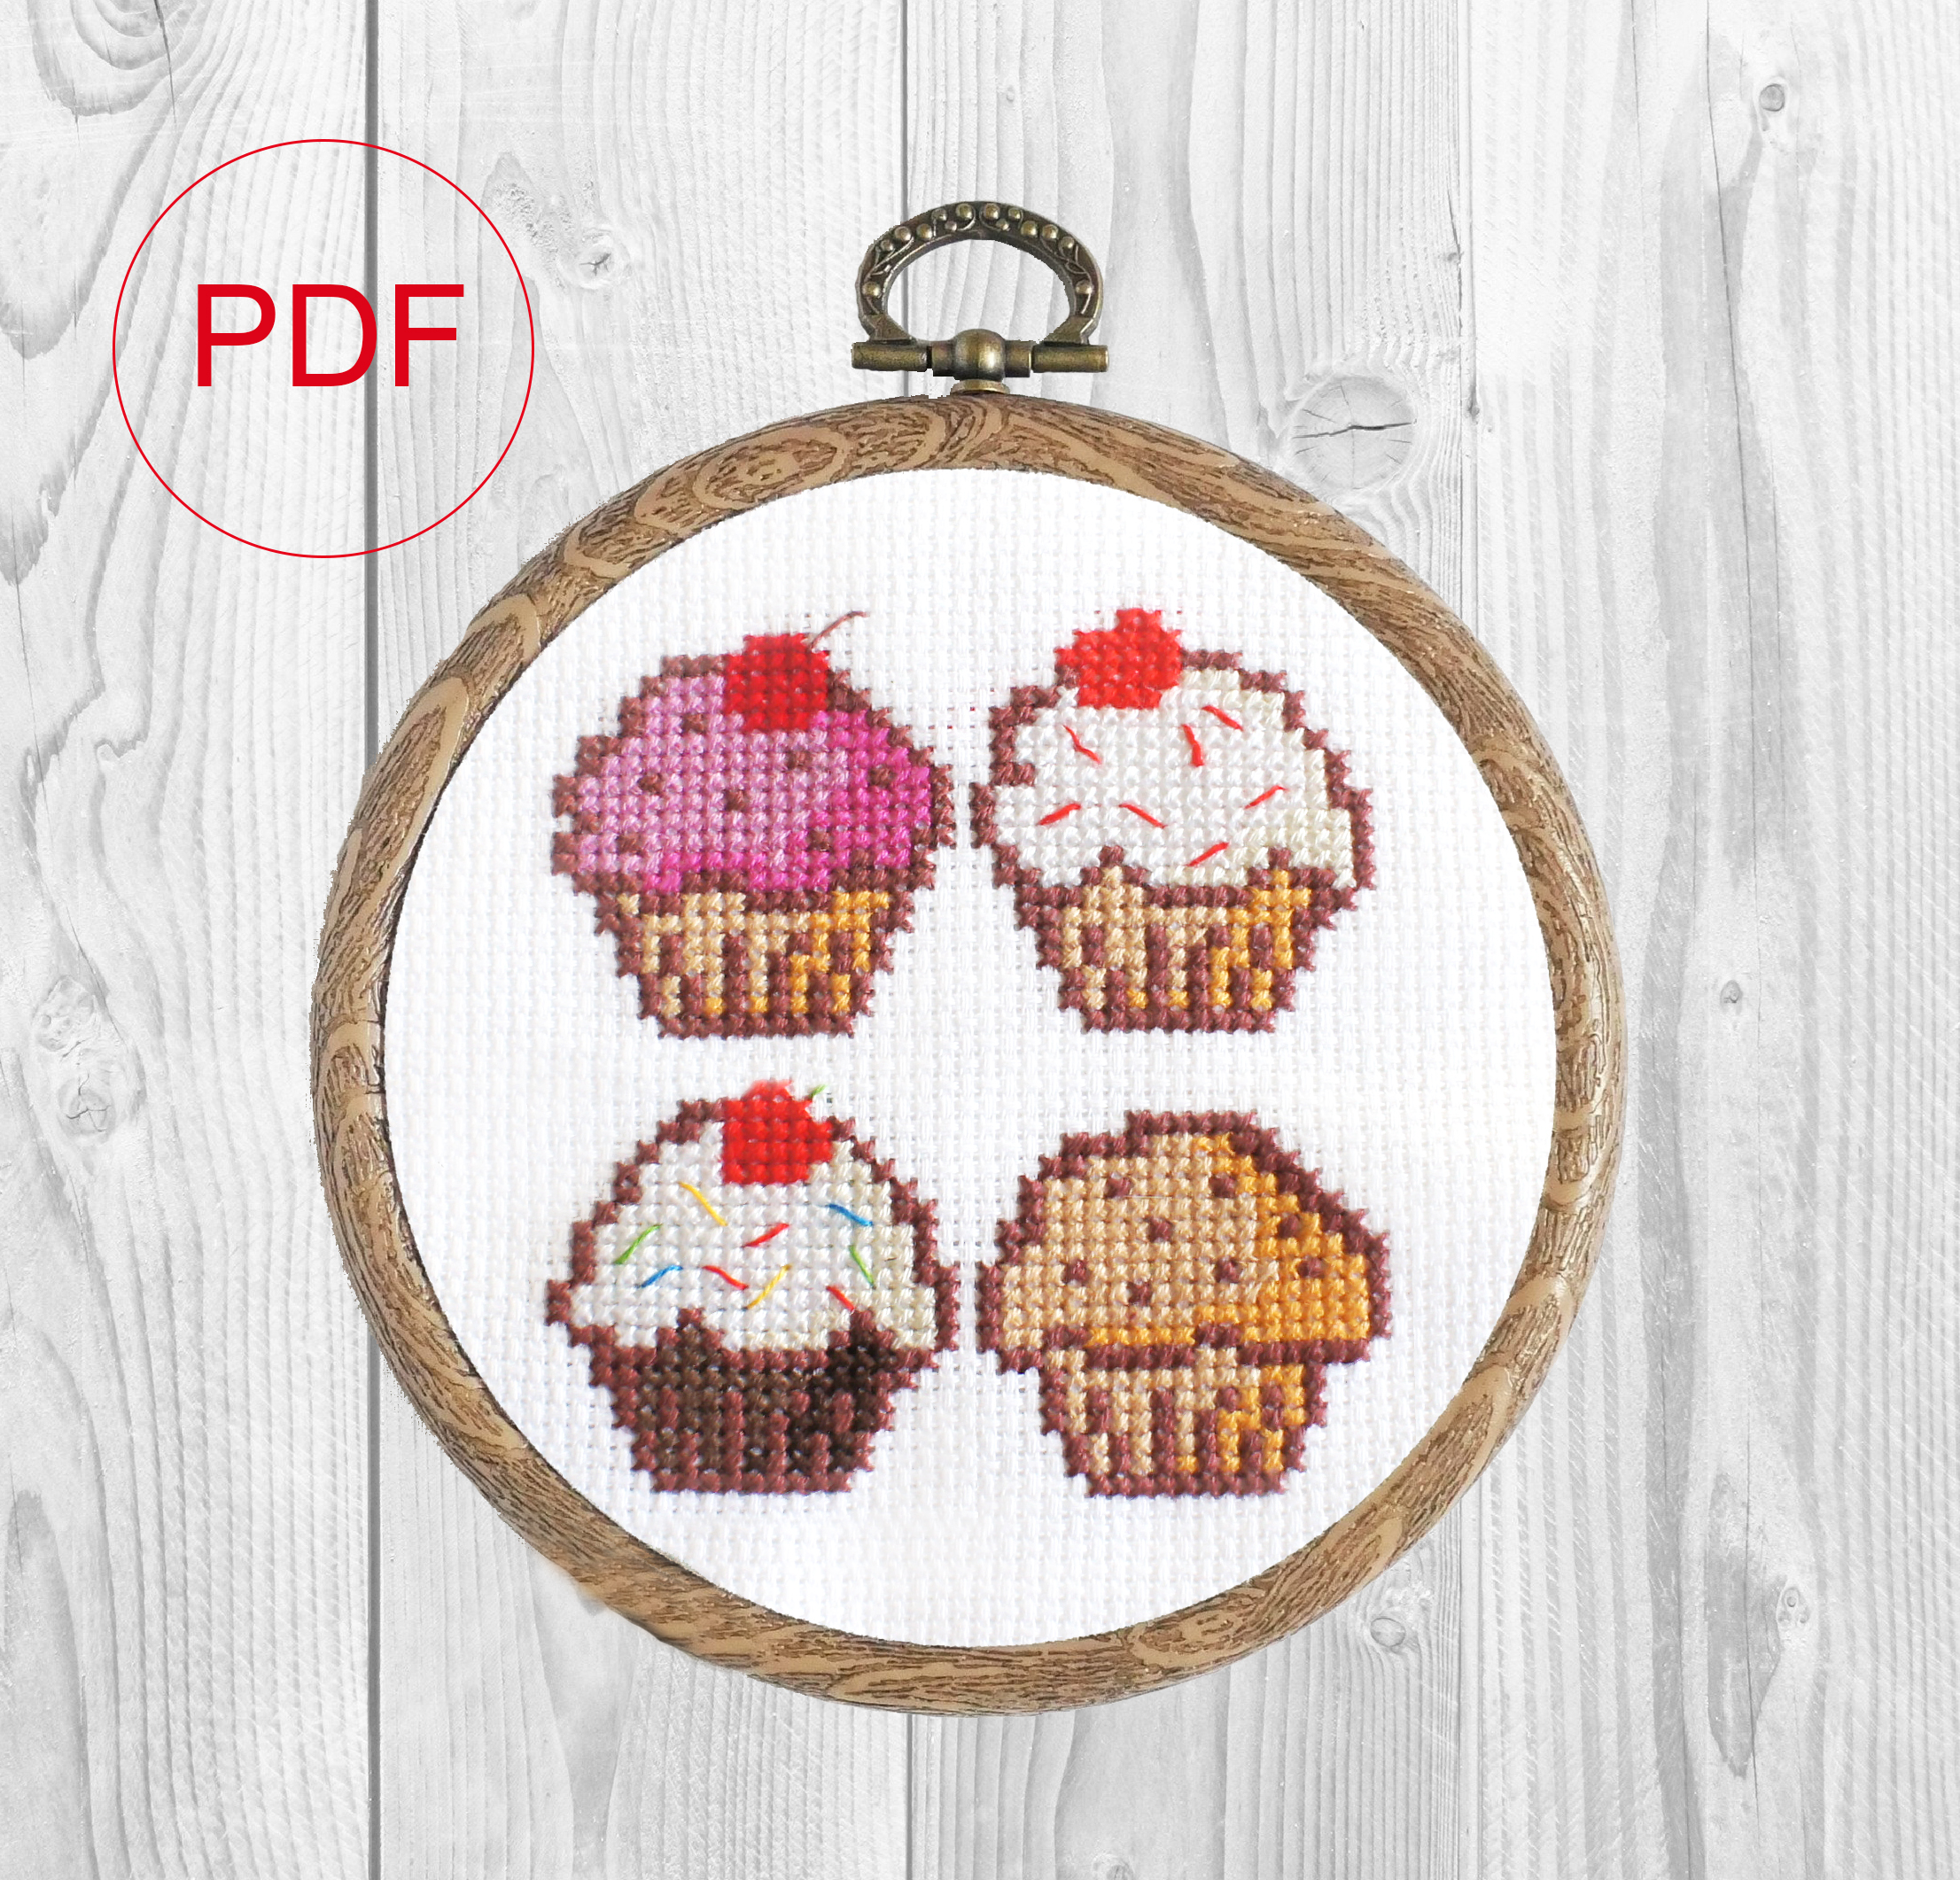 Tiny cross stitch pattern 4 cupcakes. Pattern for beginners